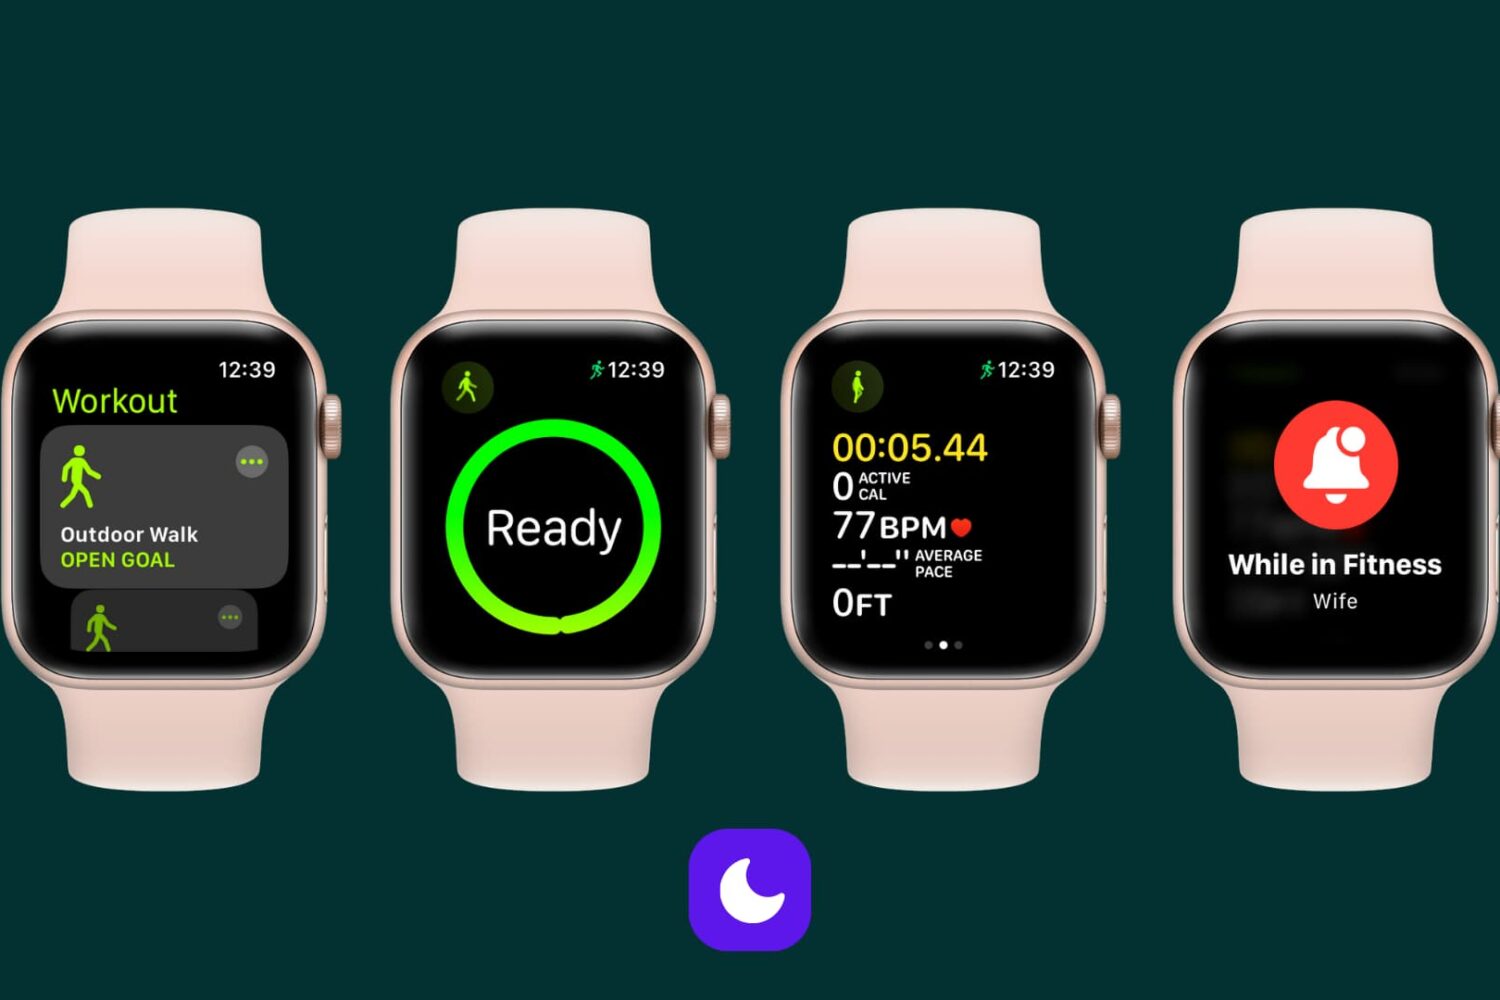 Automatically silence Apple Watch notifications during workout